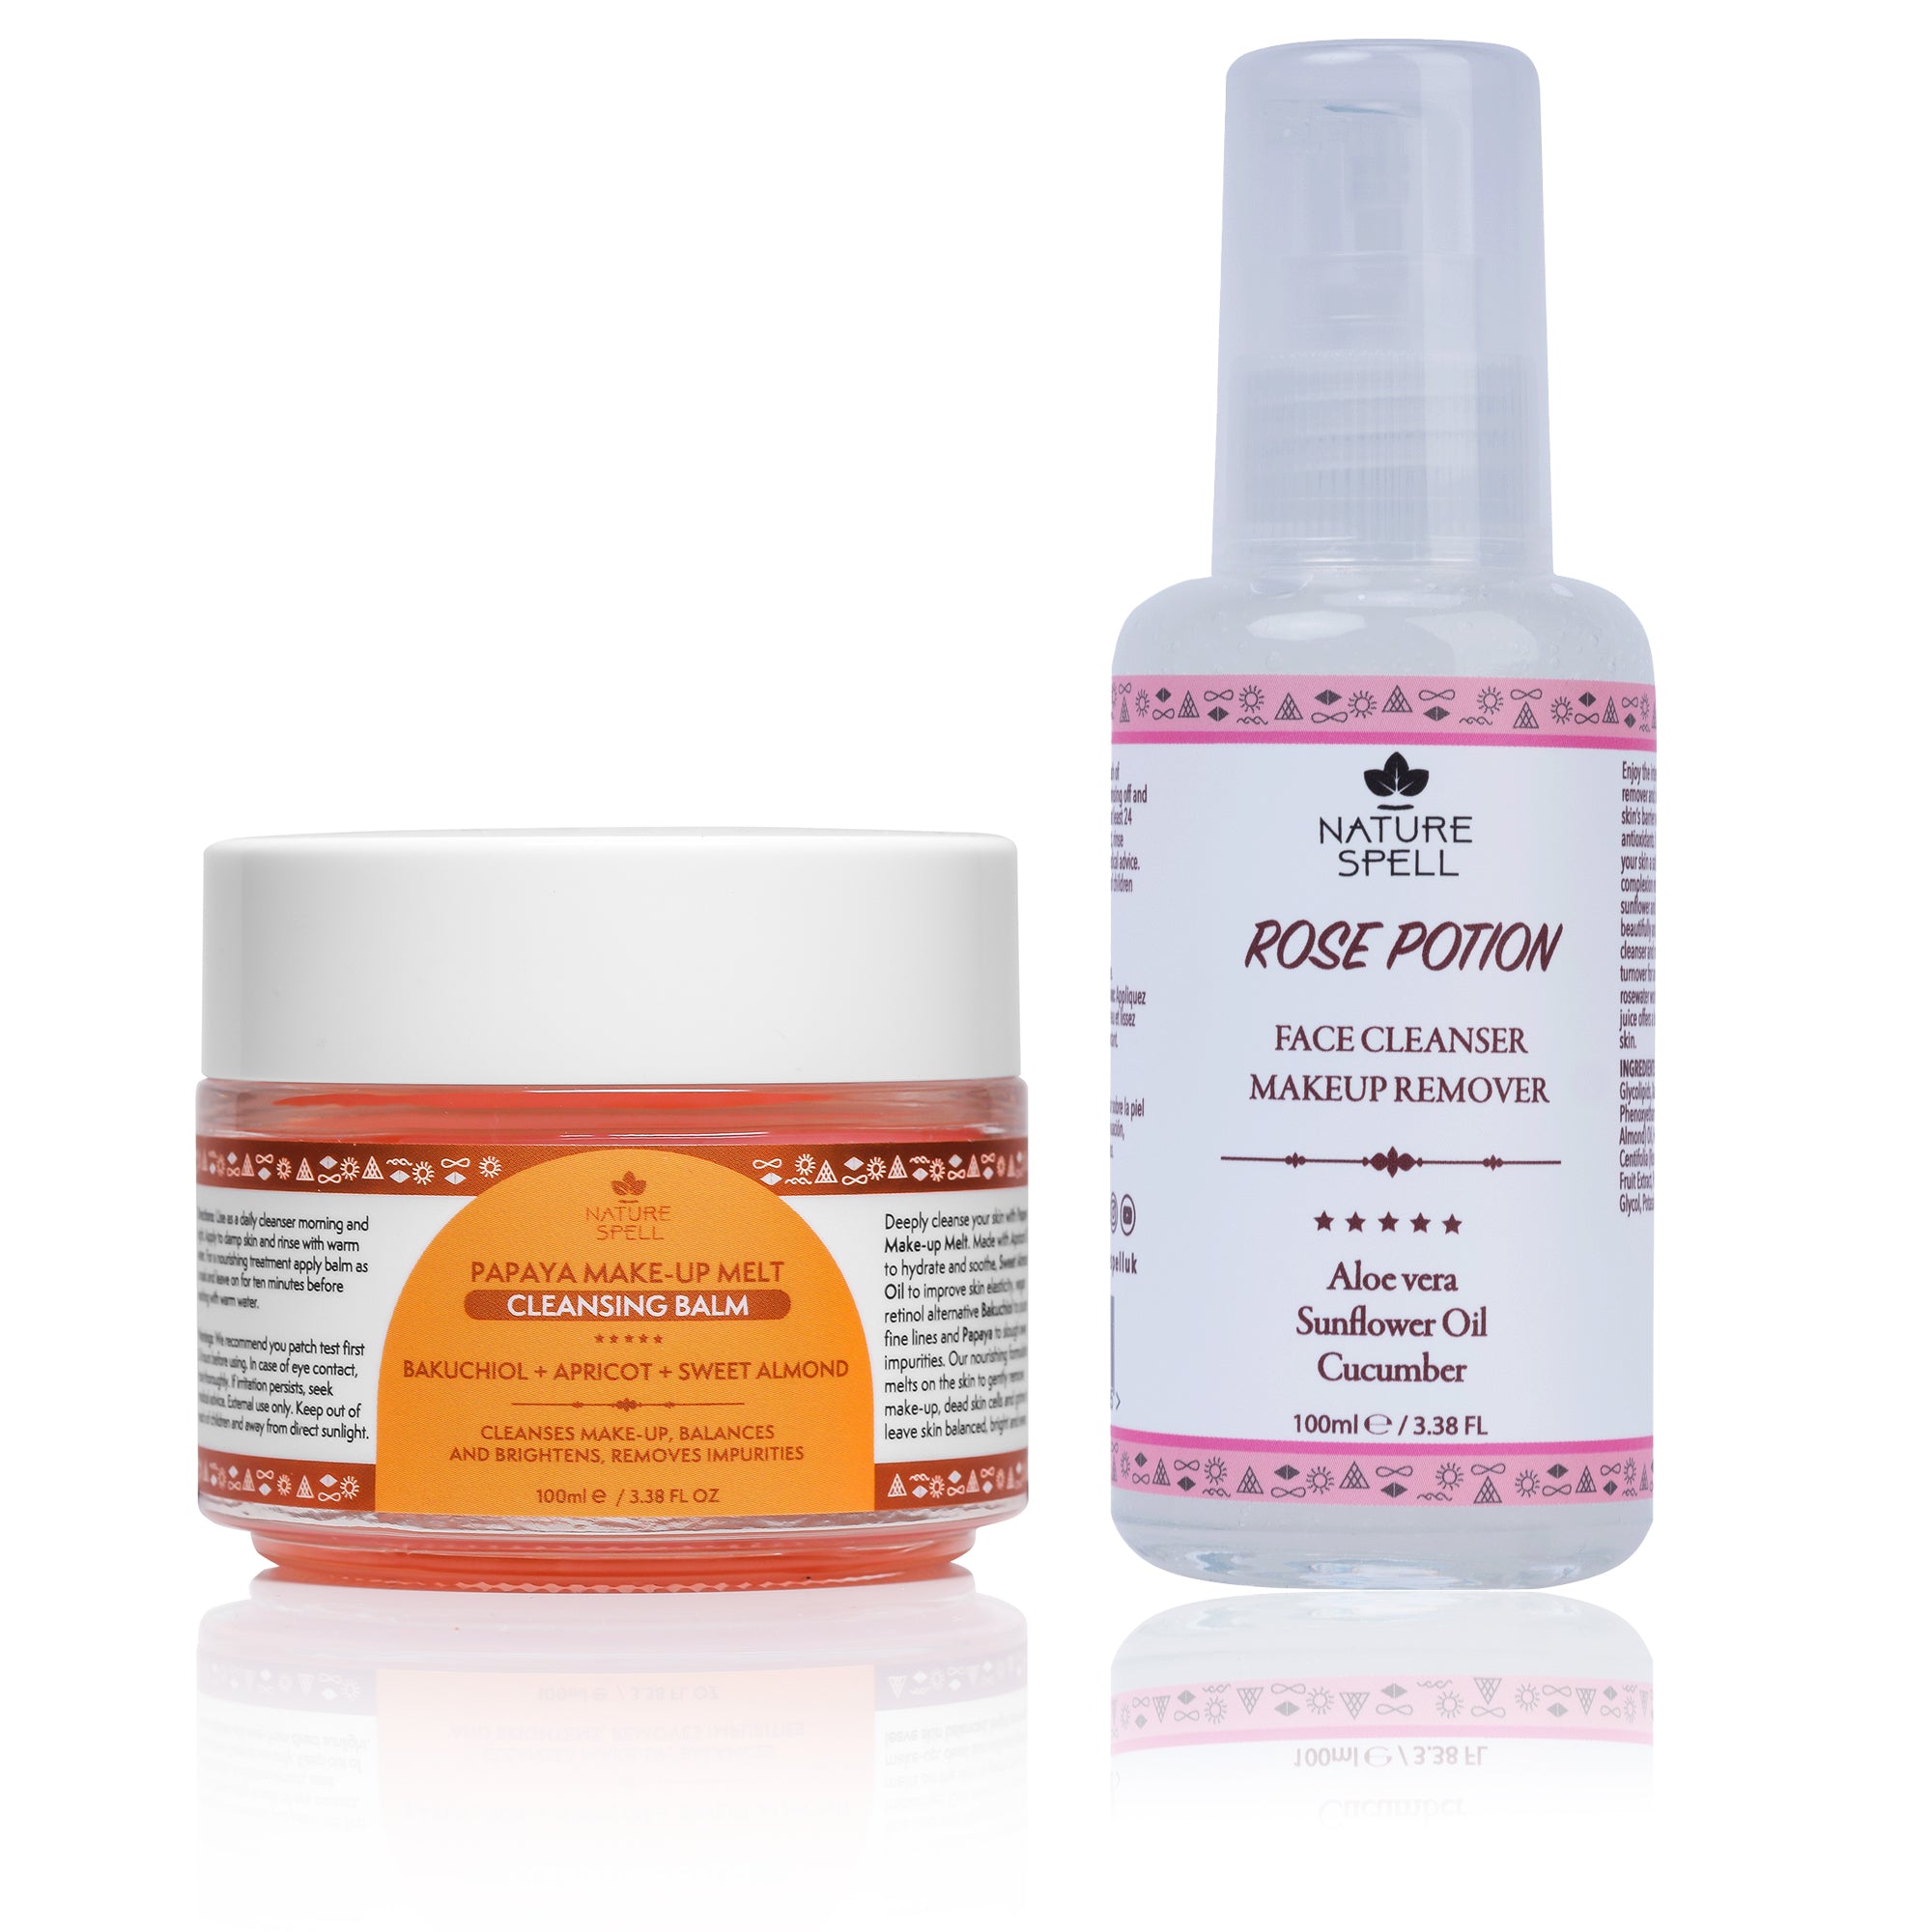 Double Cleansing Duo: Papaya Make-up Melt Cleansing Balm & Rose Aloe Vera Facial Cleanser